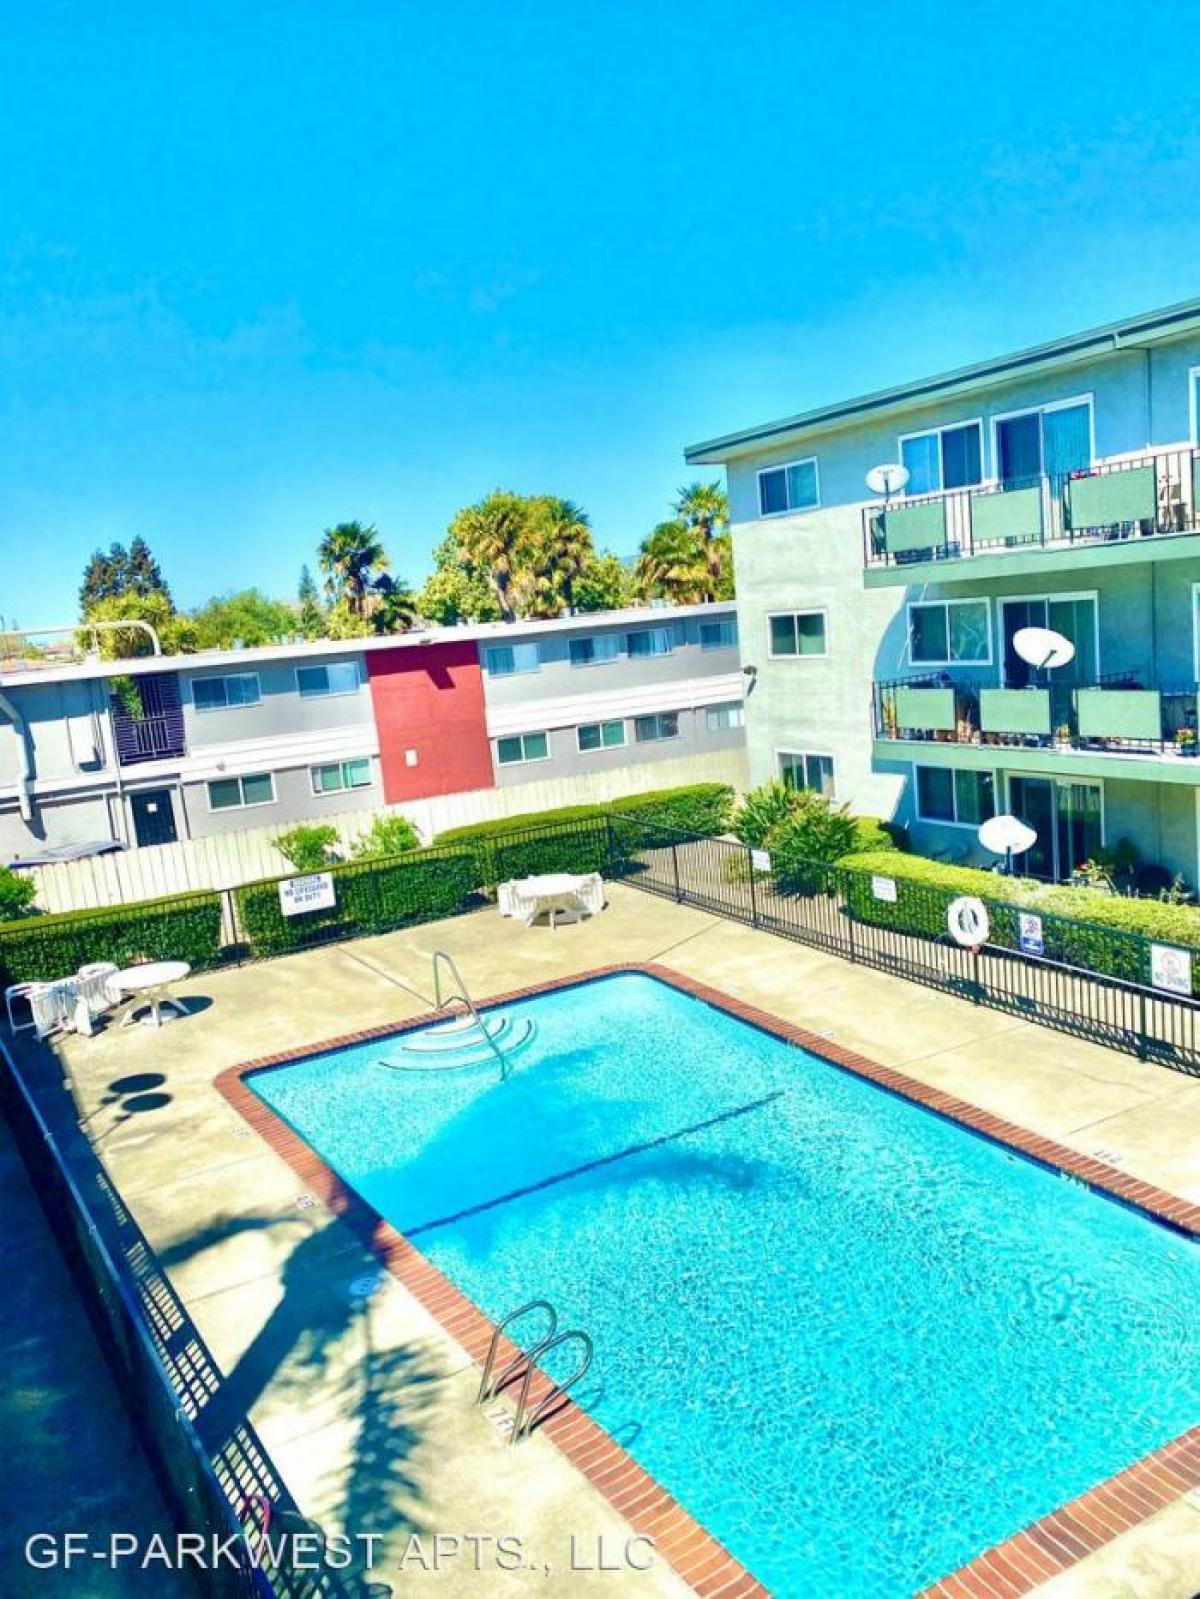 Picture of Apartment For Rent in San Leandro, California, United States